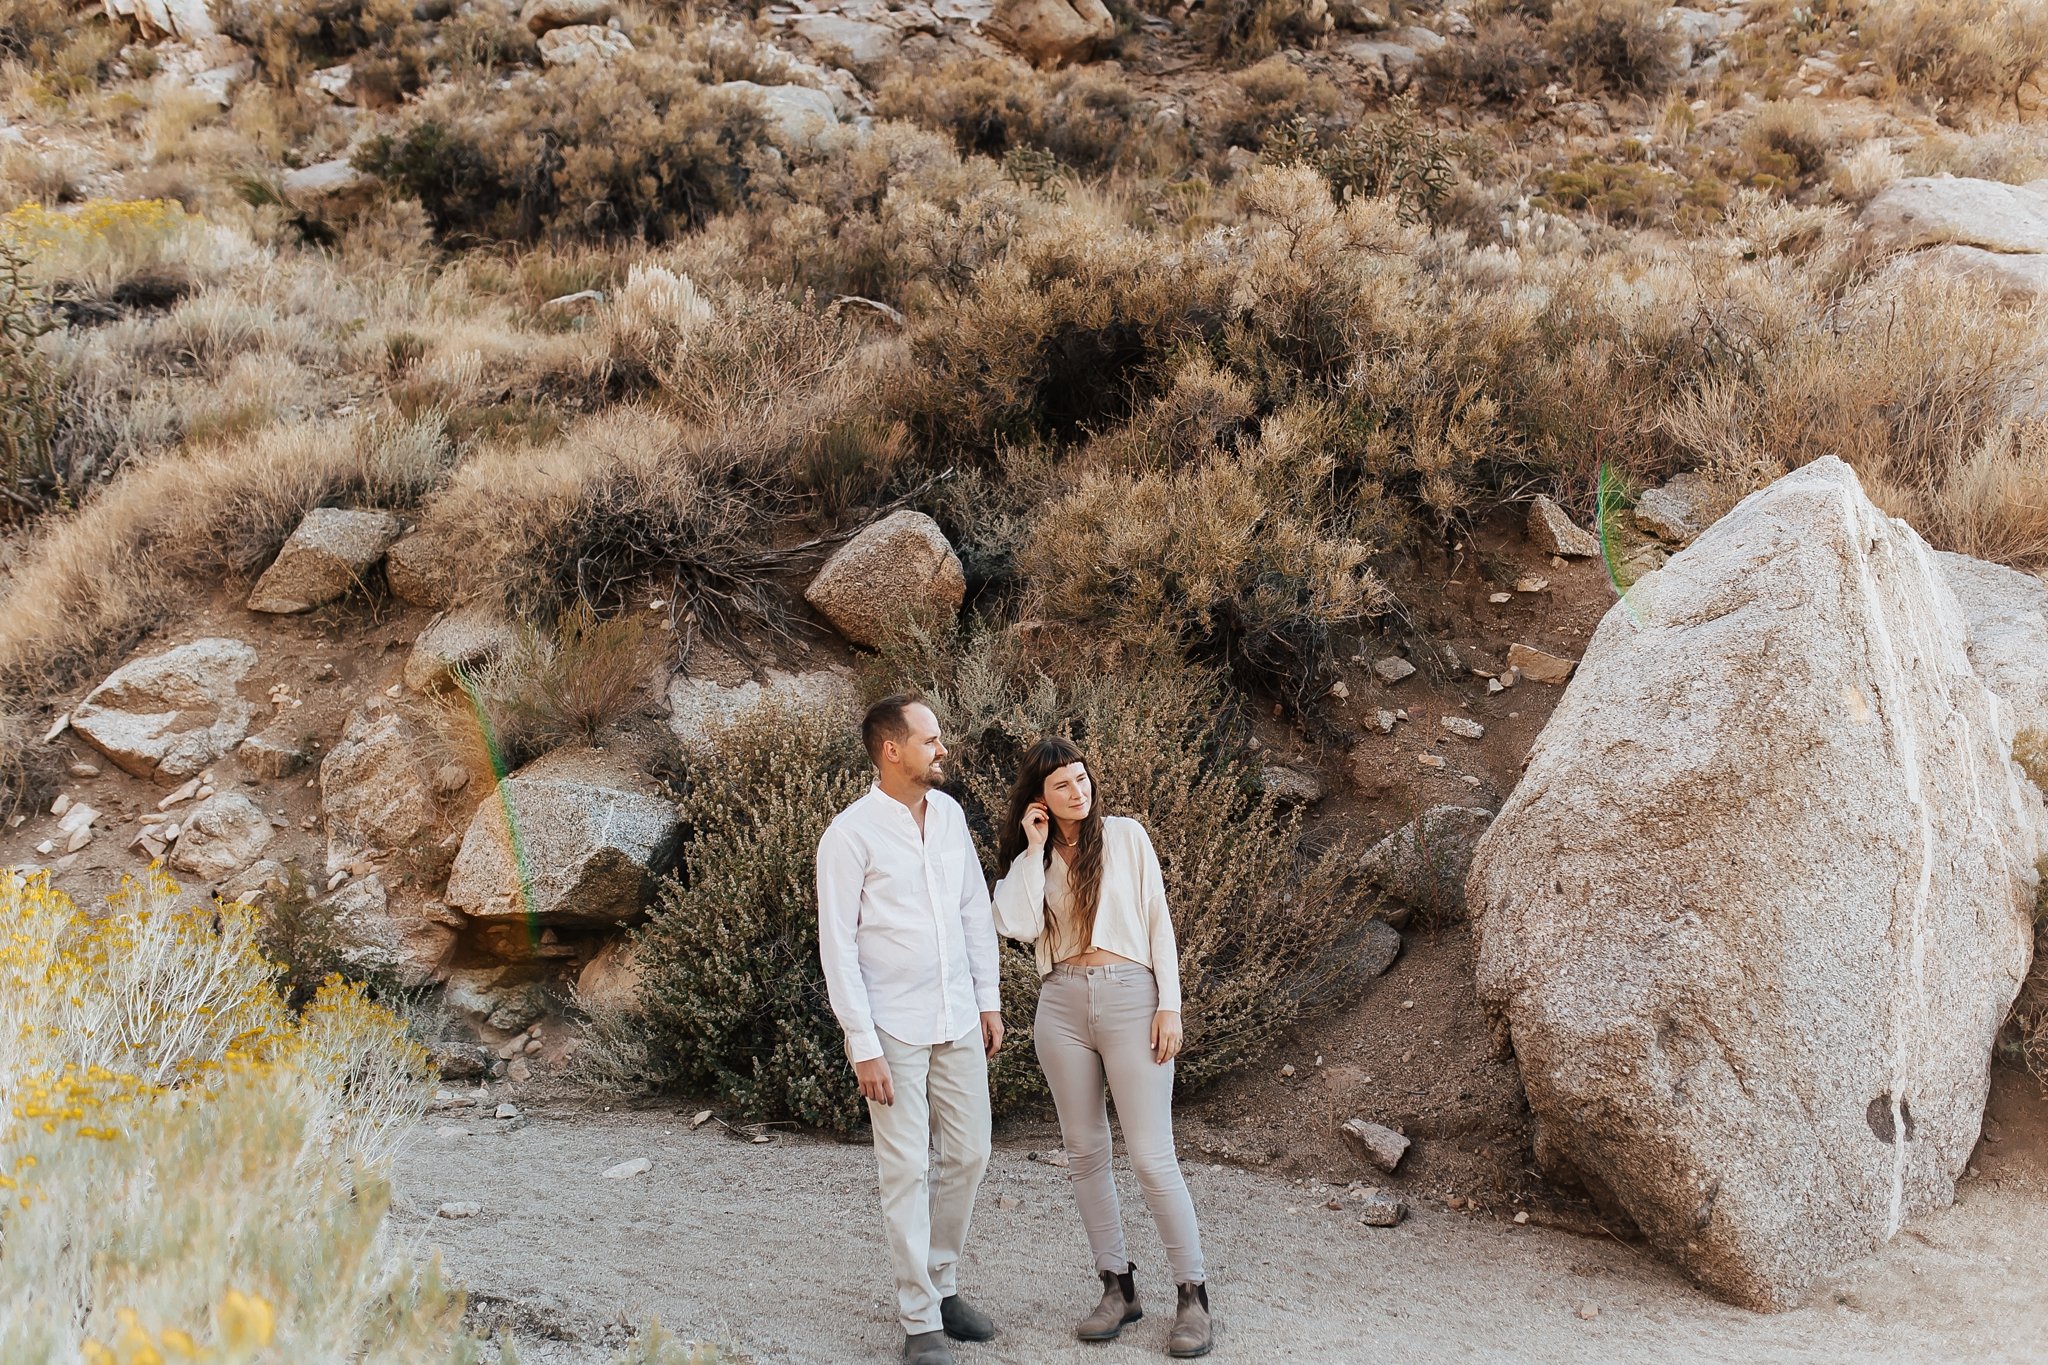 Alicia+lucia+photography+-+albuquerque+wedding+photographer+-+santa+fe+wedding+photography+-+new+mexico+wedding+photographer+-+new+mexico+wedding+-+desert+engagement+-+foothills+engagement+-+mountain+engagement_0040.jpg